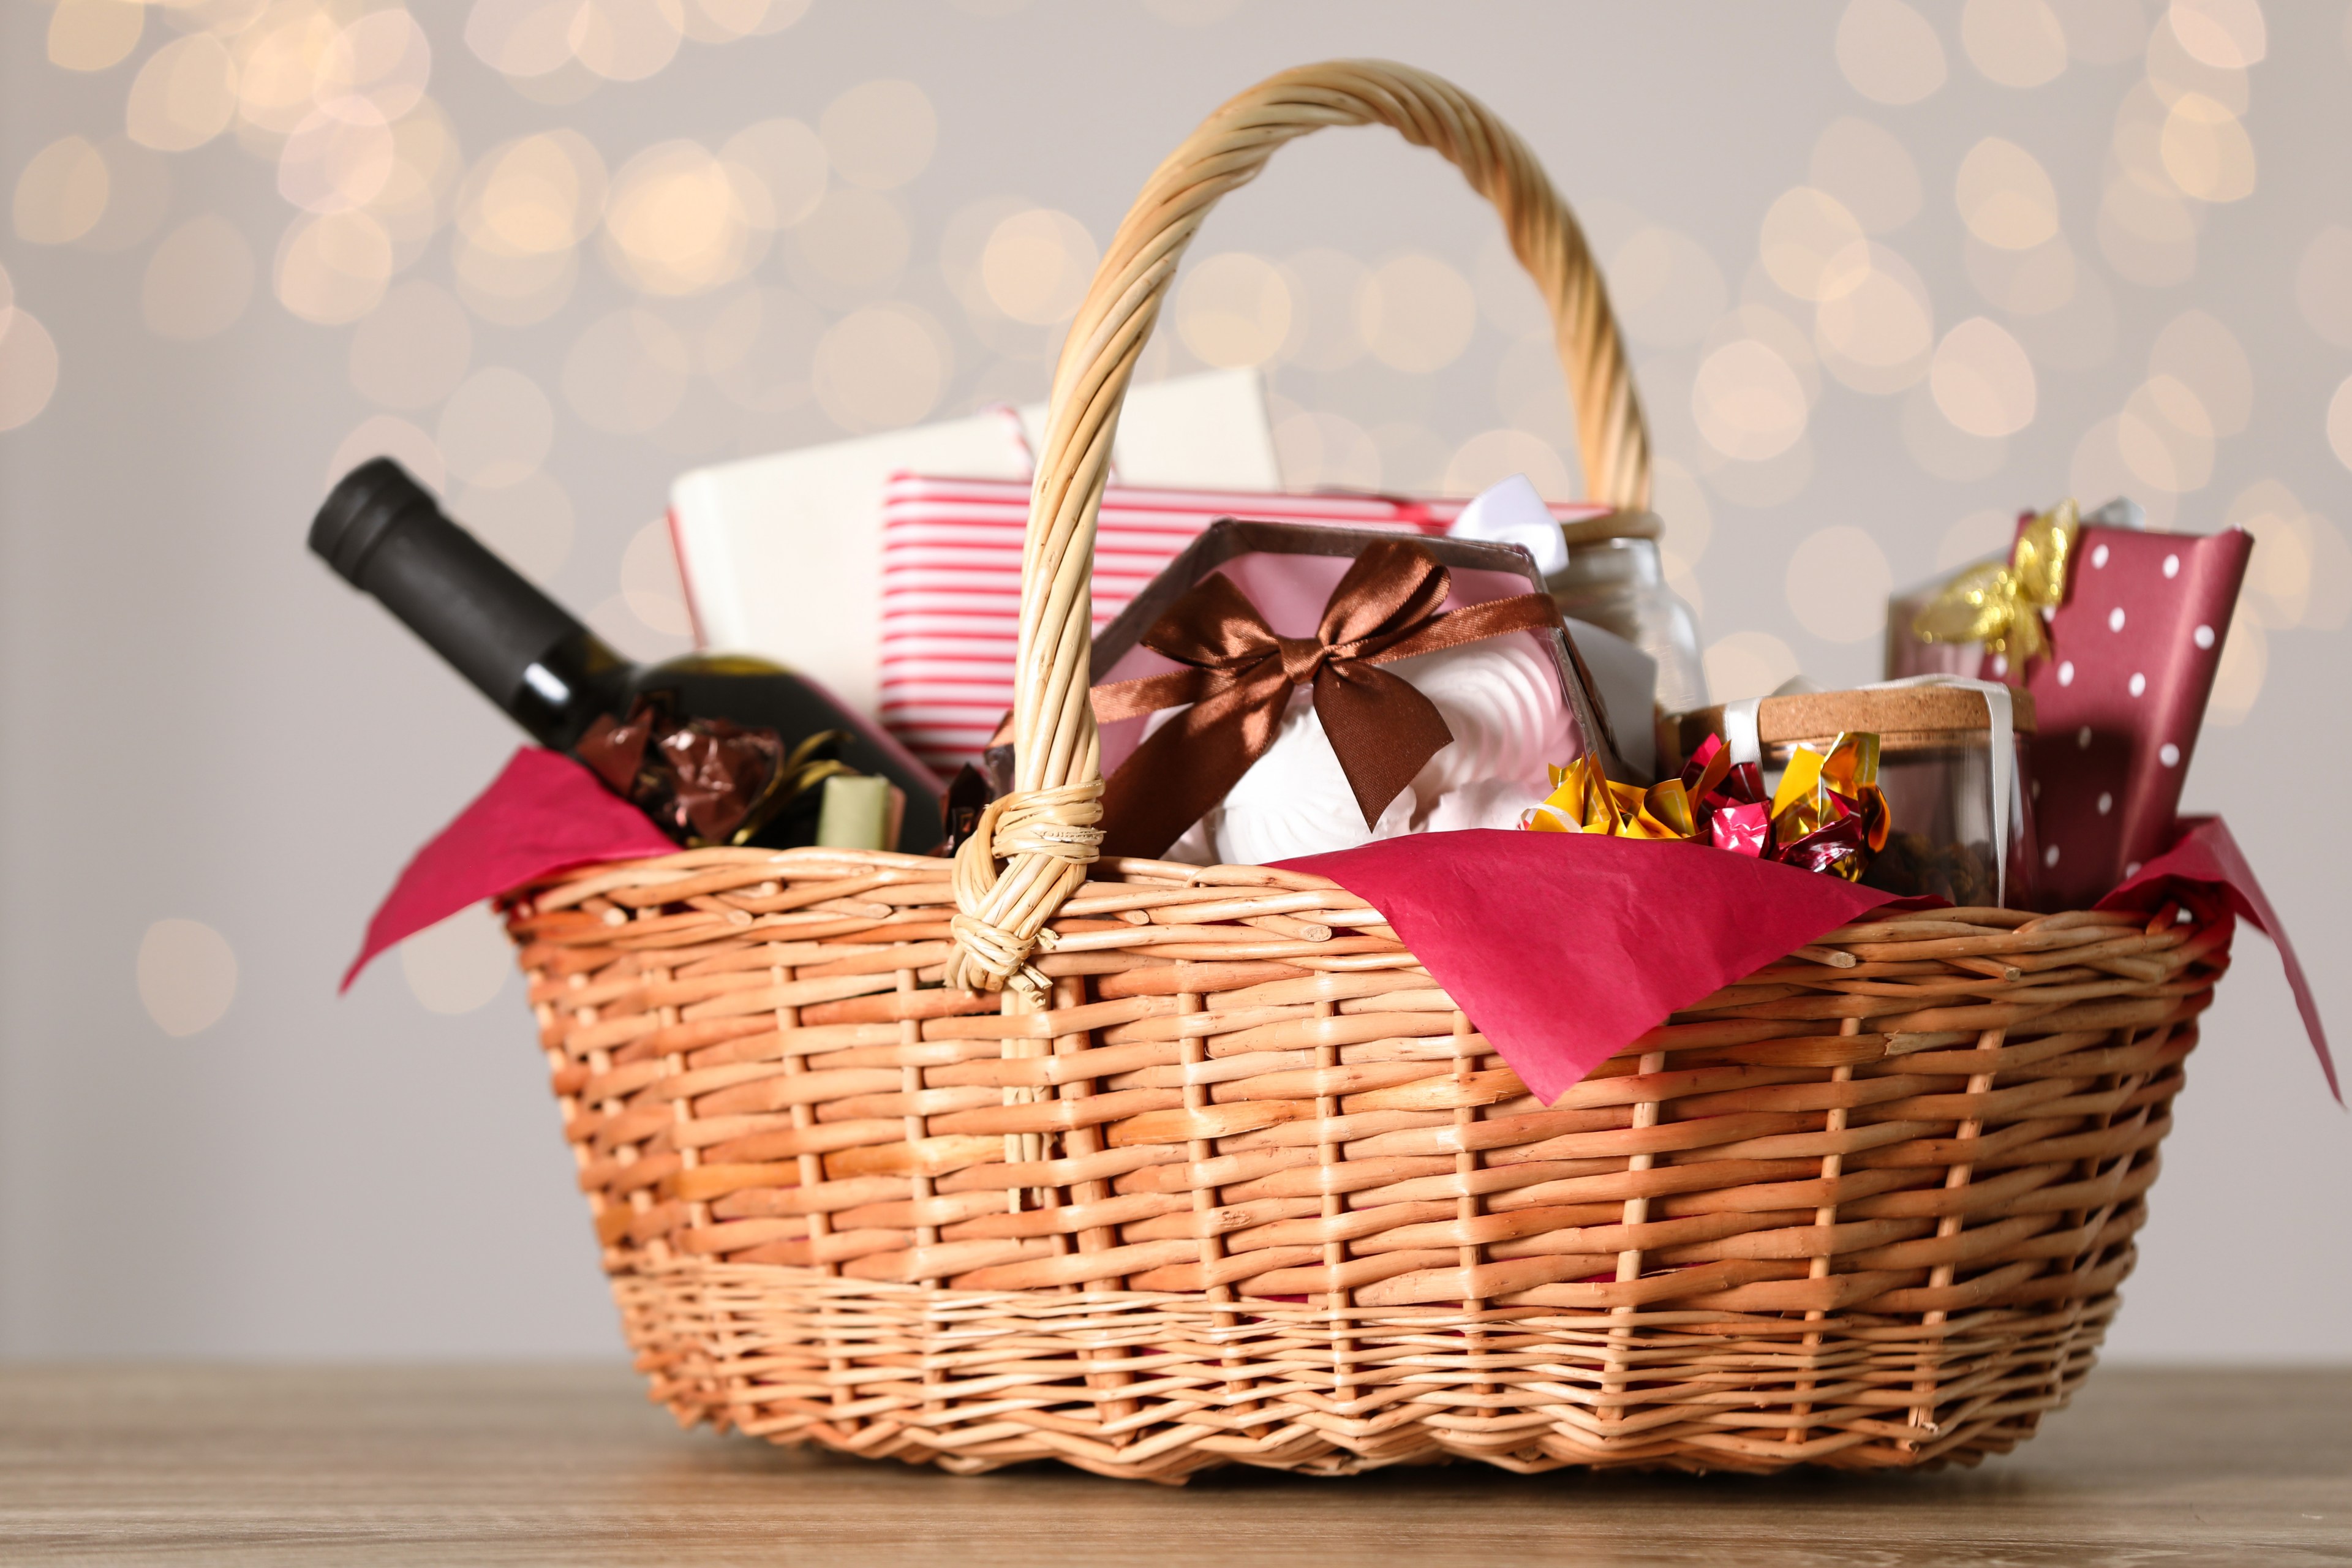 A wicker basket holds holiday items like wine and chocolates.